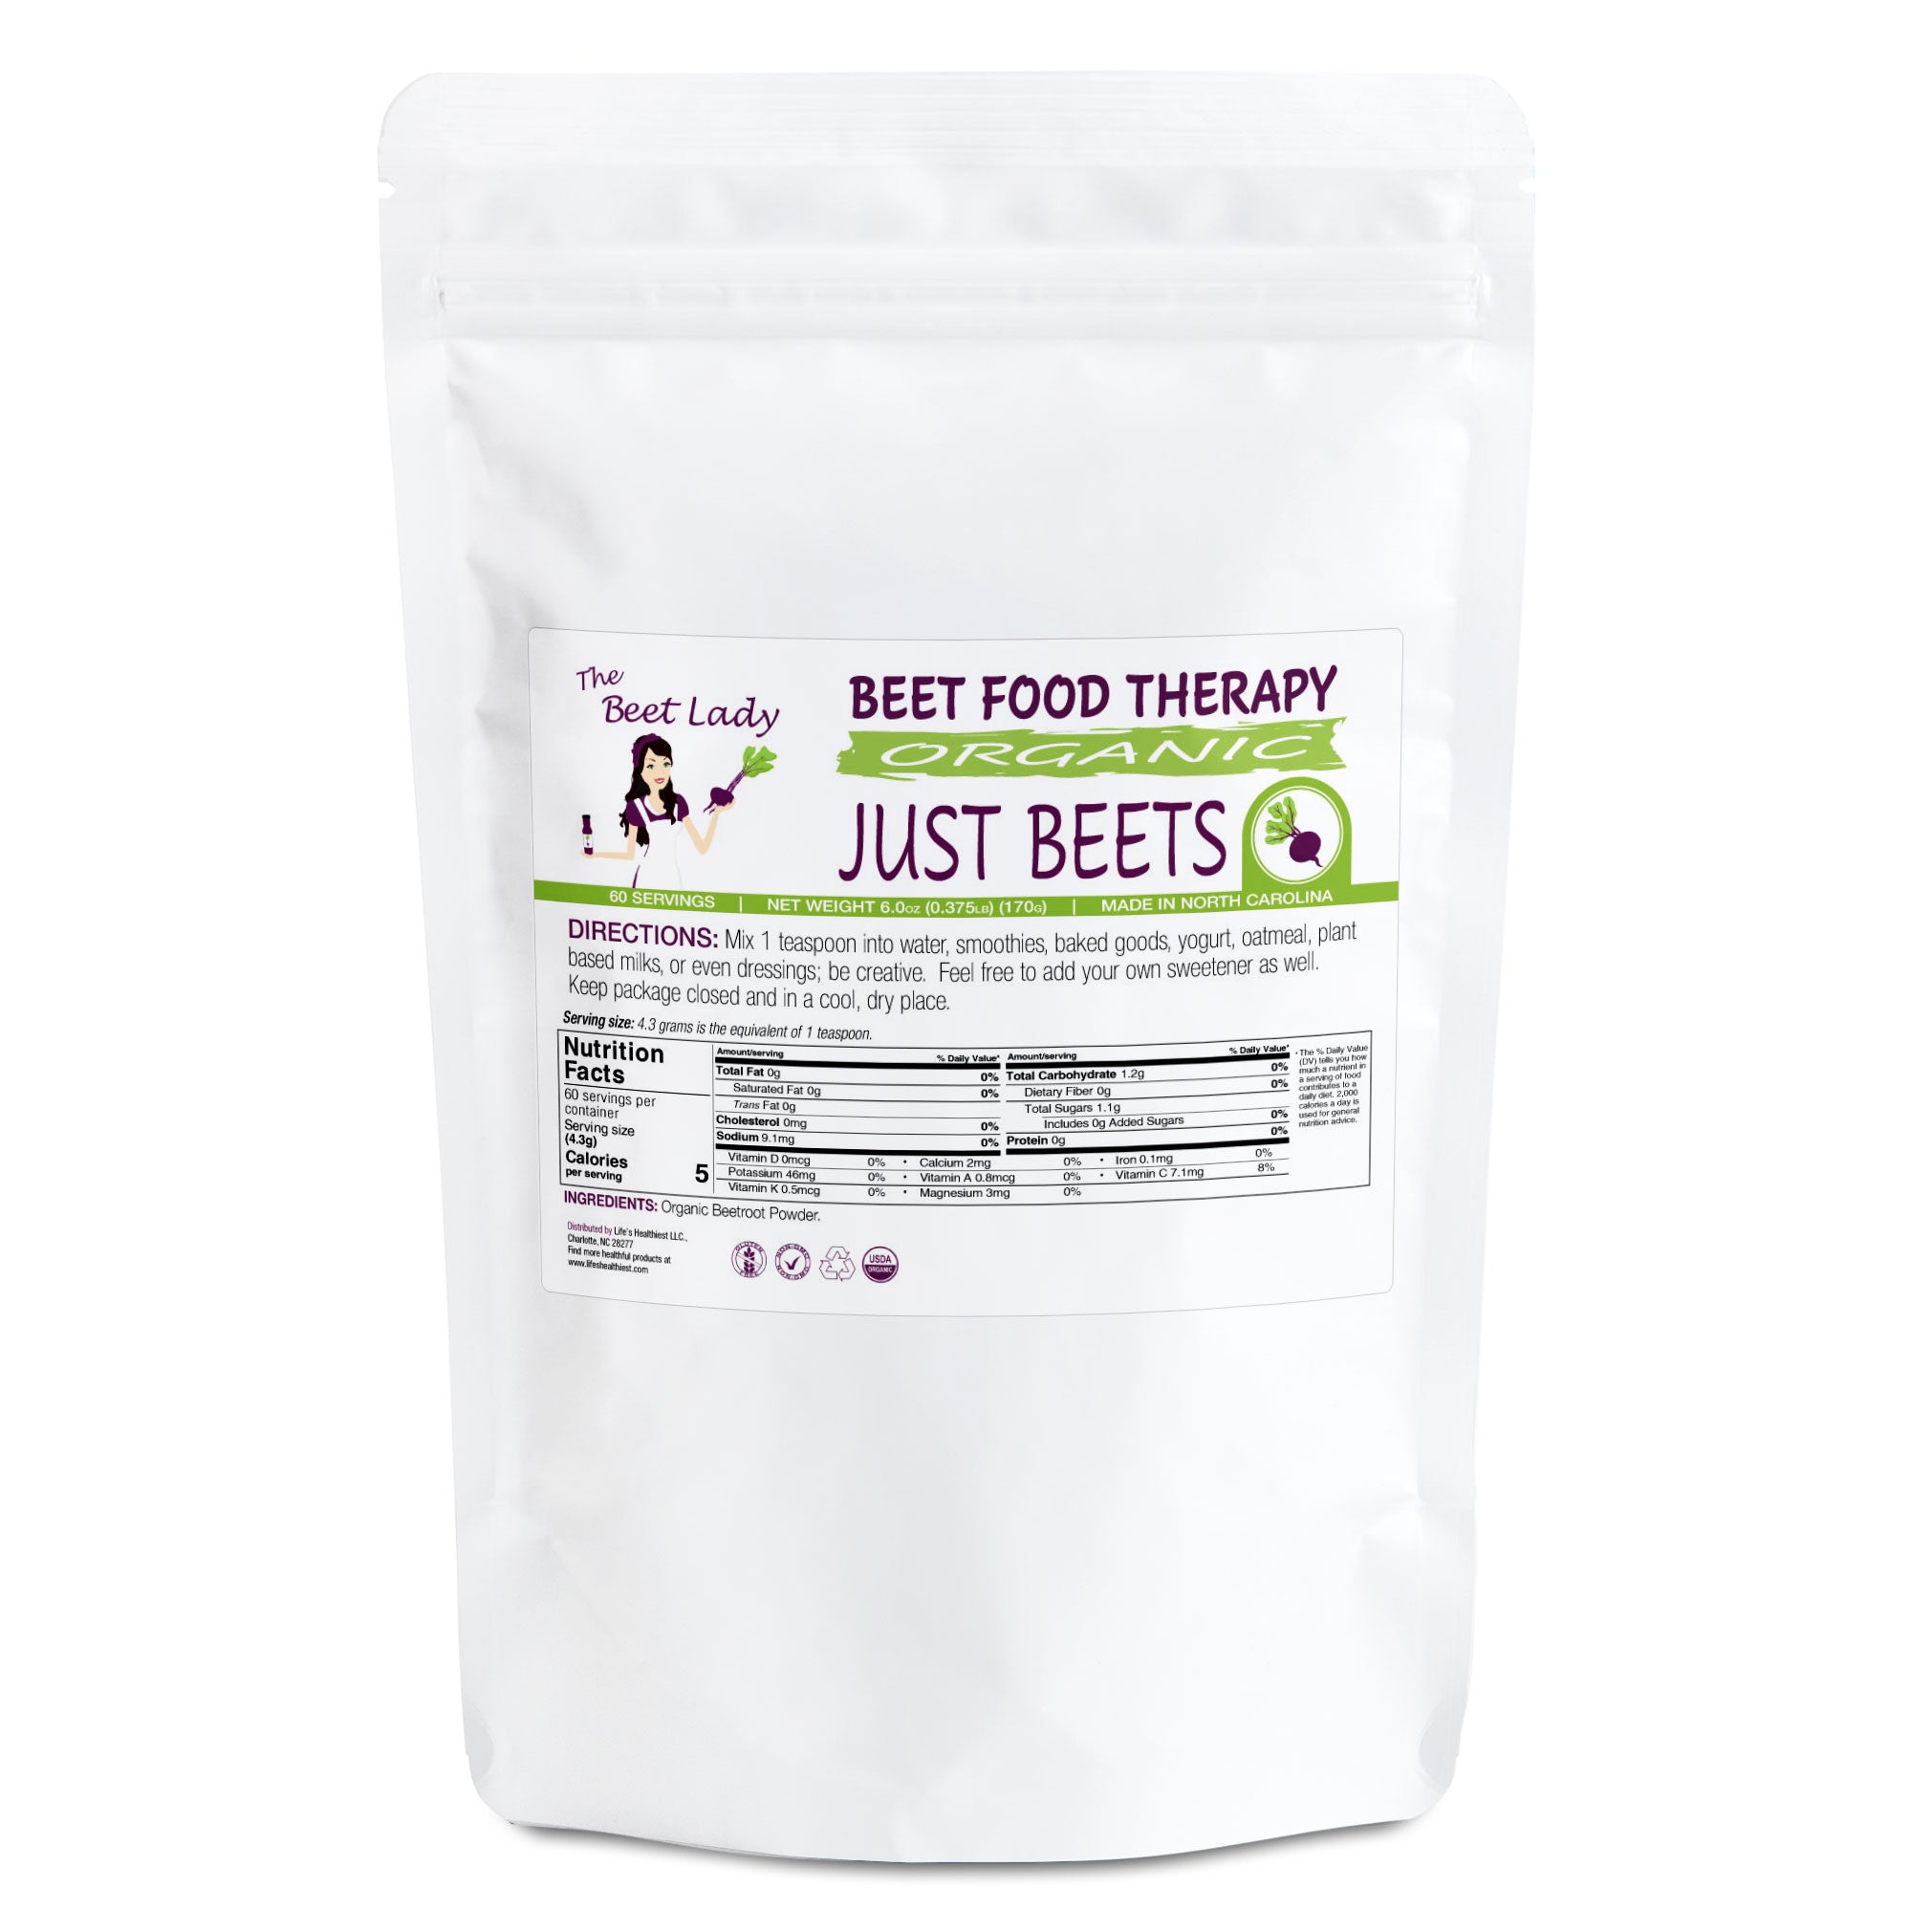 Life's Healthiest Just Beets Nutritional Therapy Powder 6.0 oz